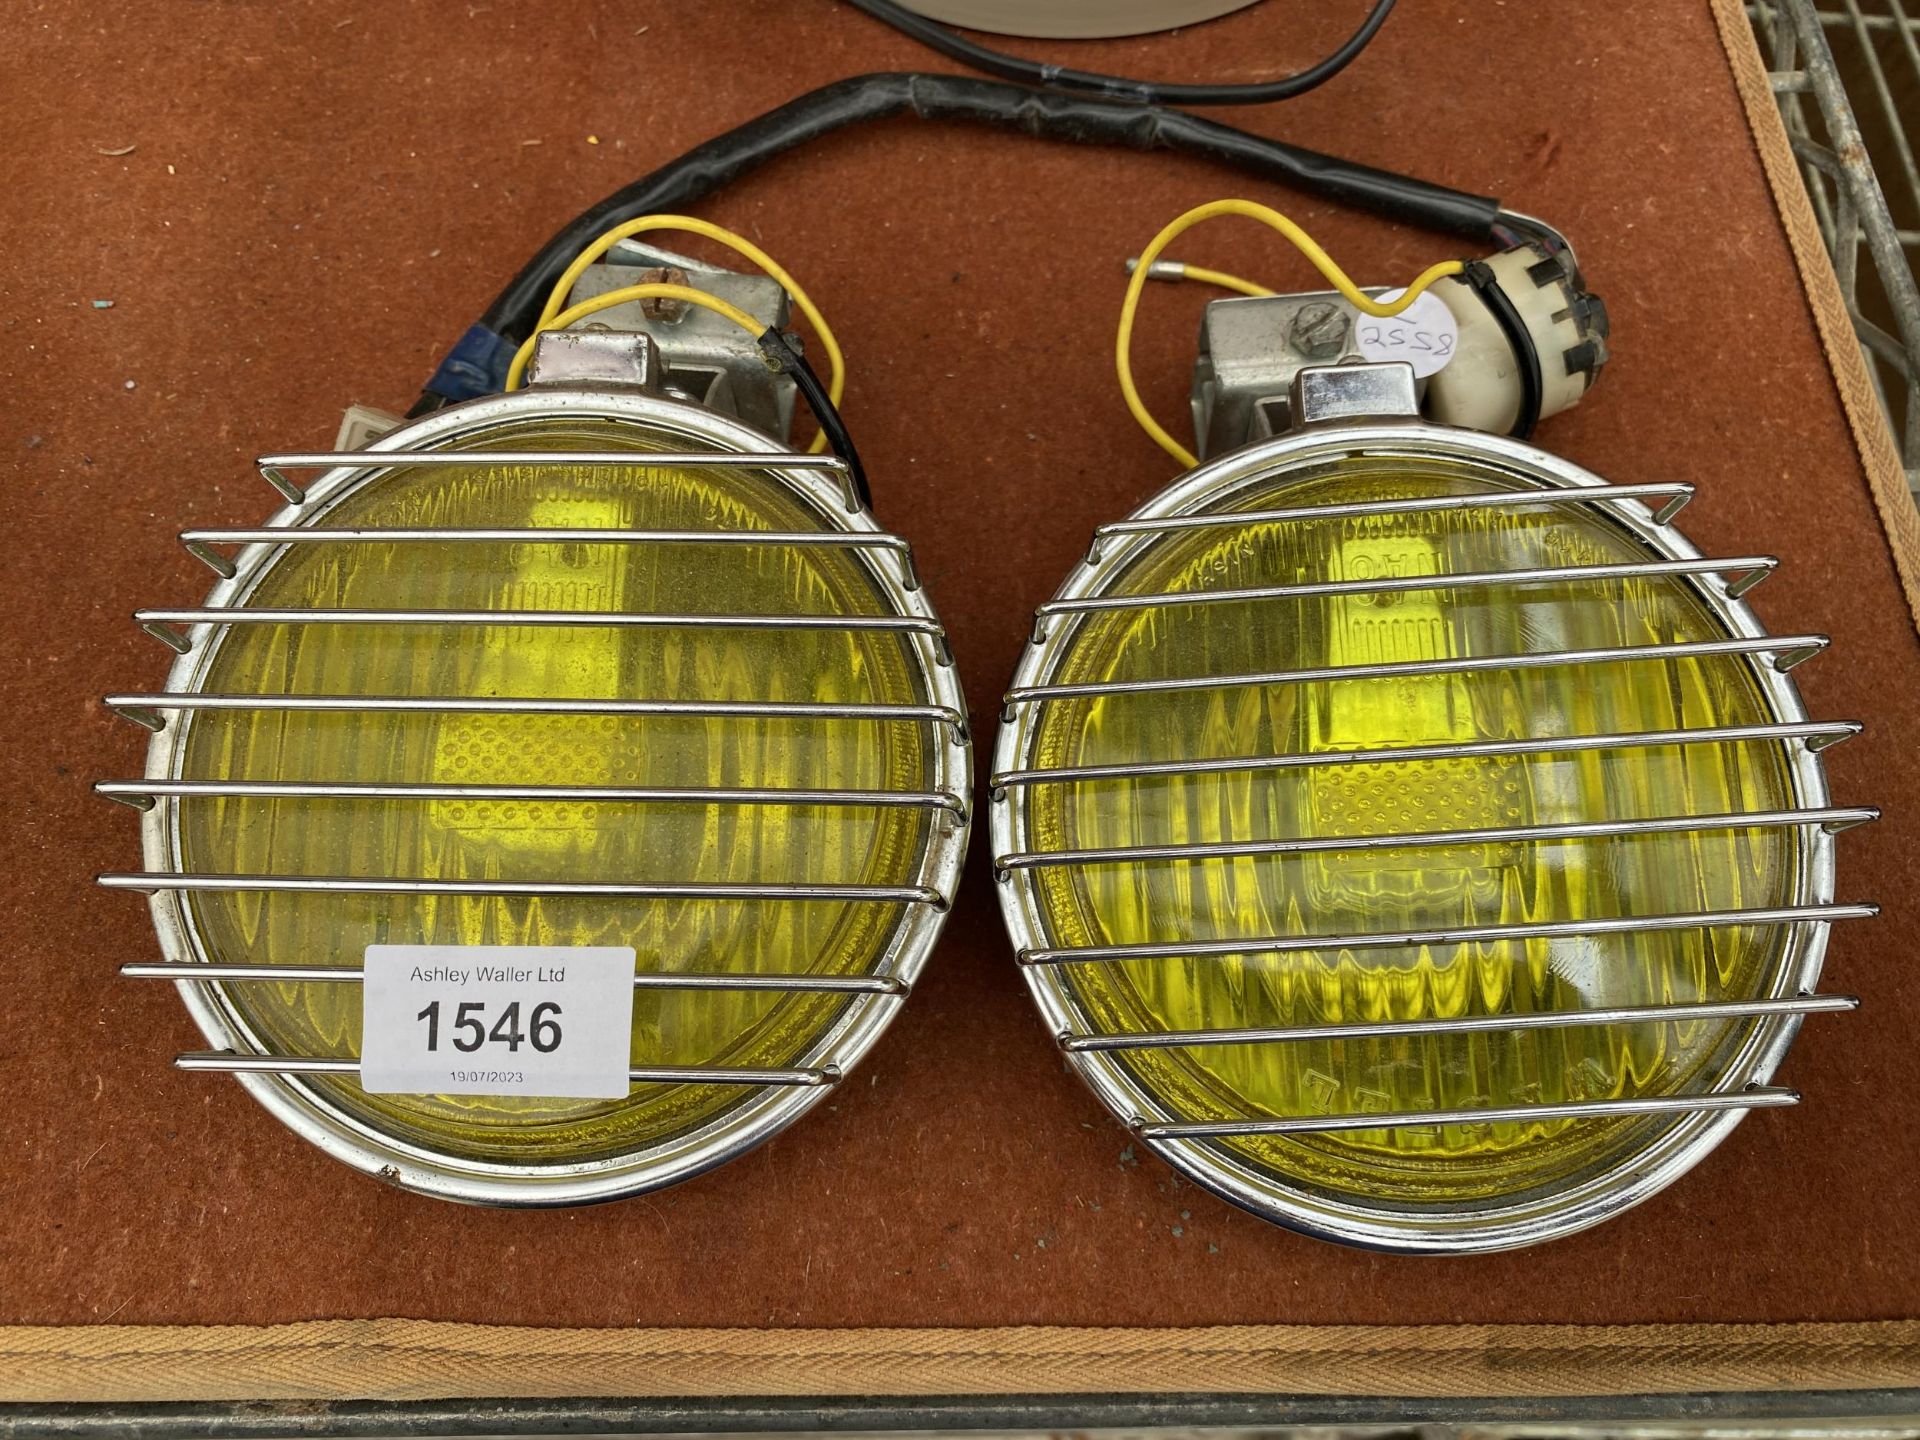 A PAIR OF VINTAGE YELLOW VEHICLE LIGHTS